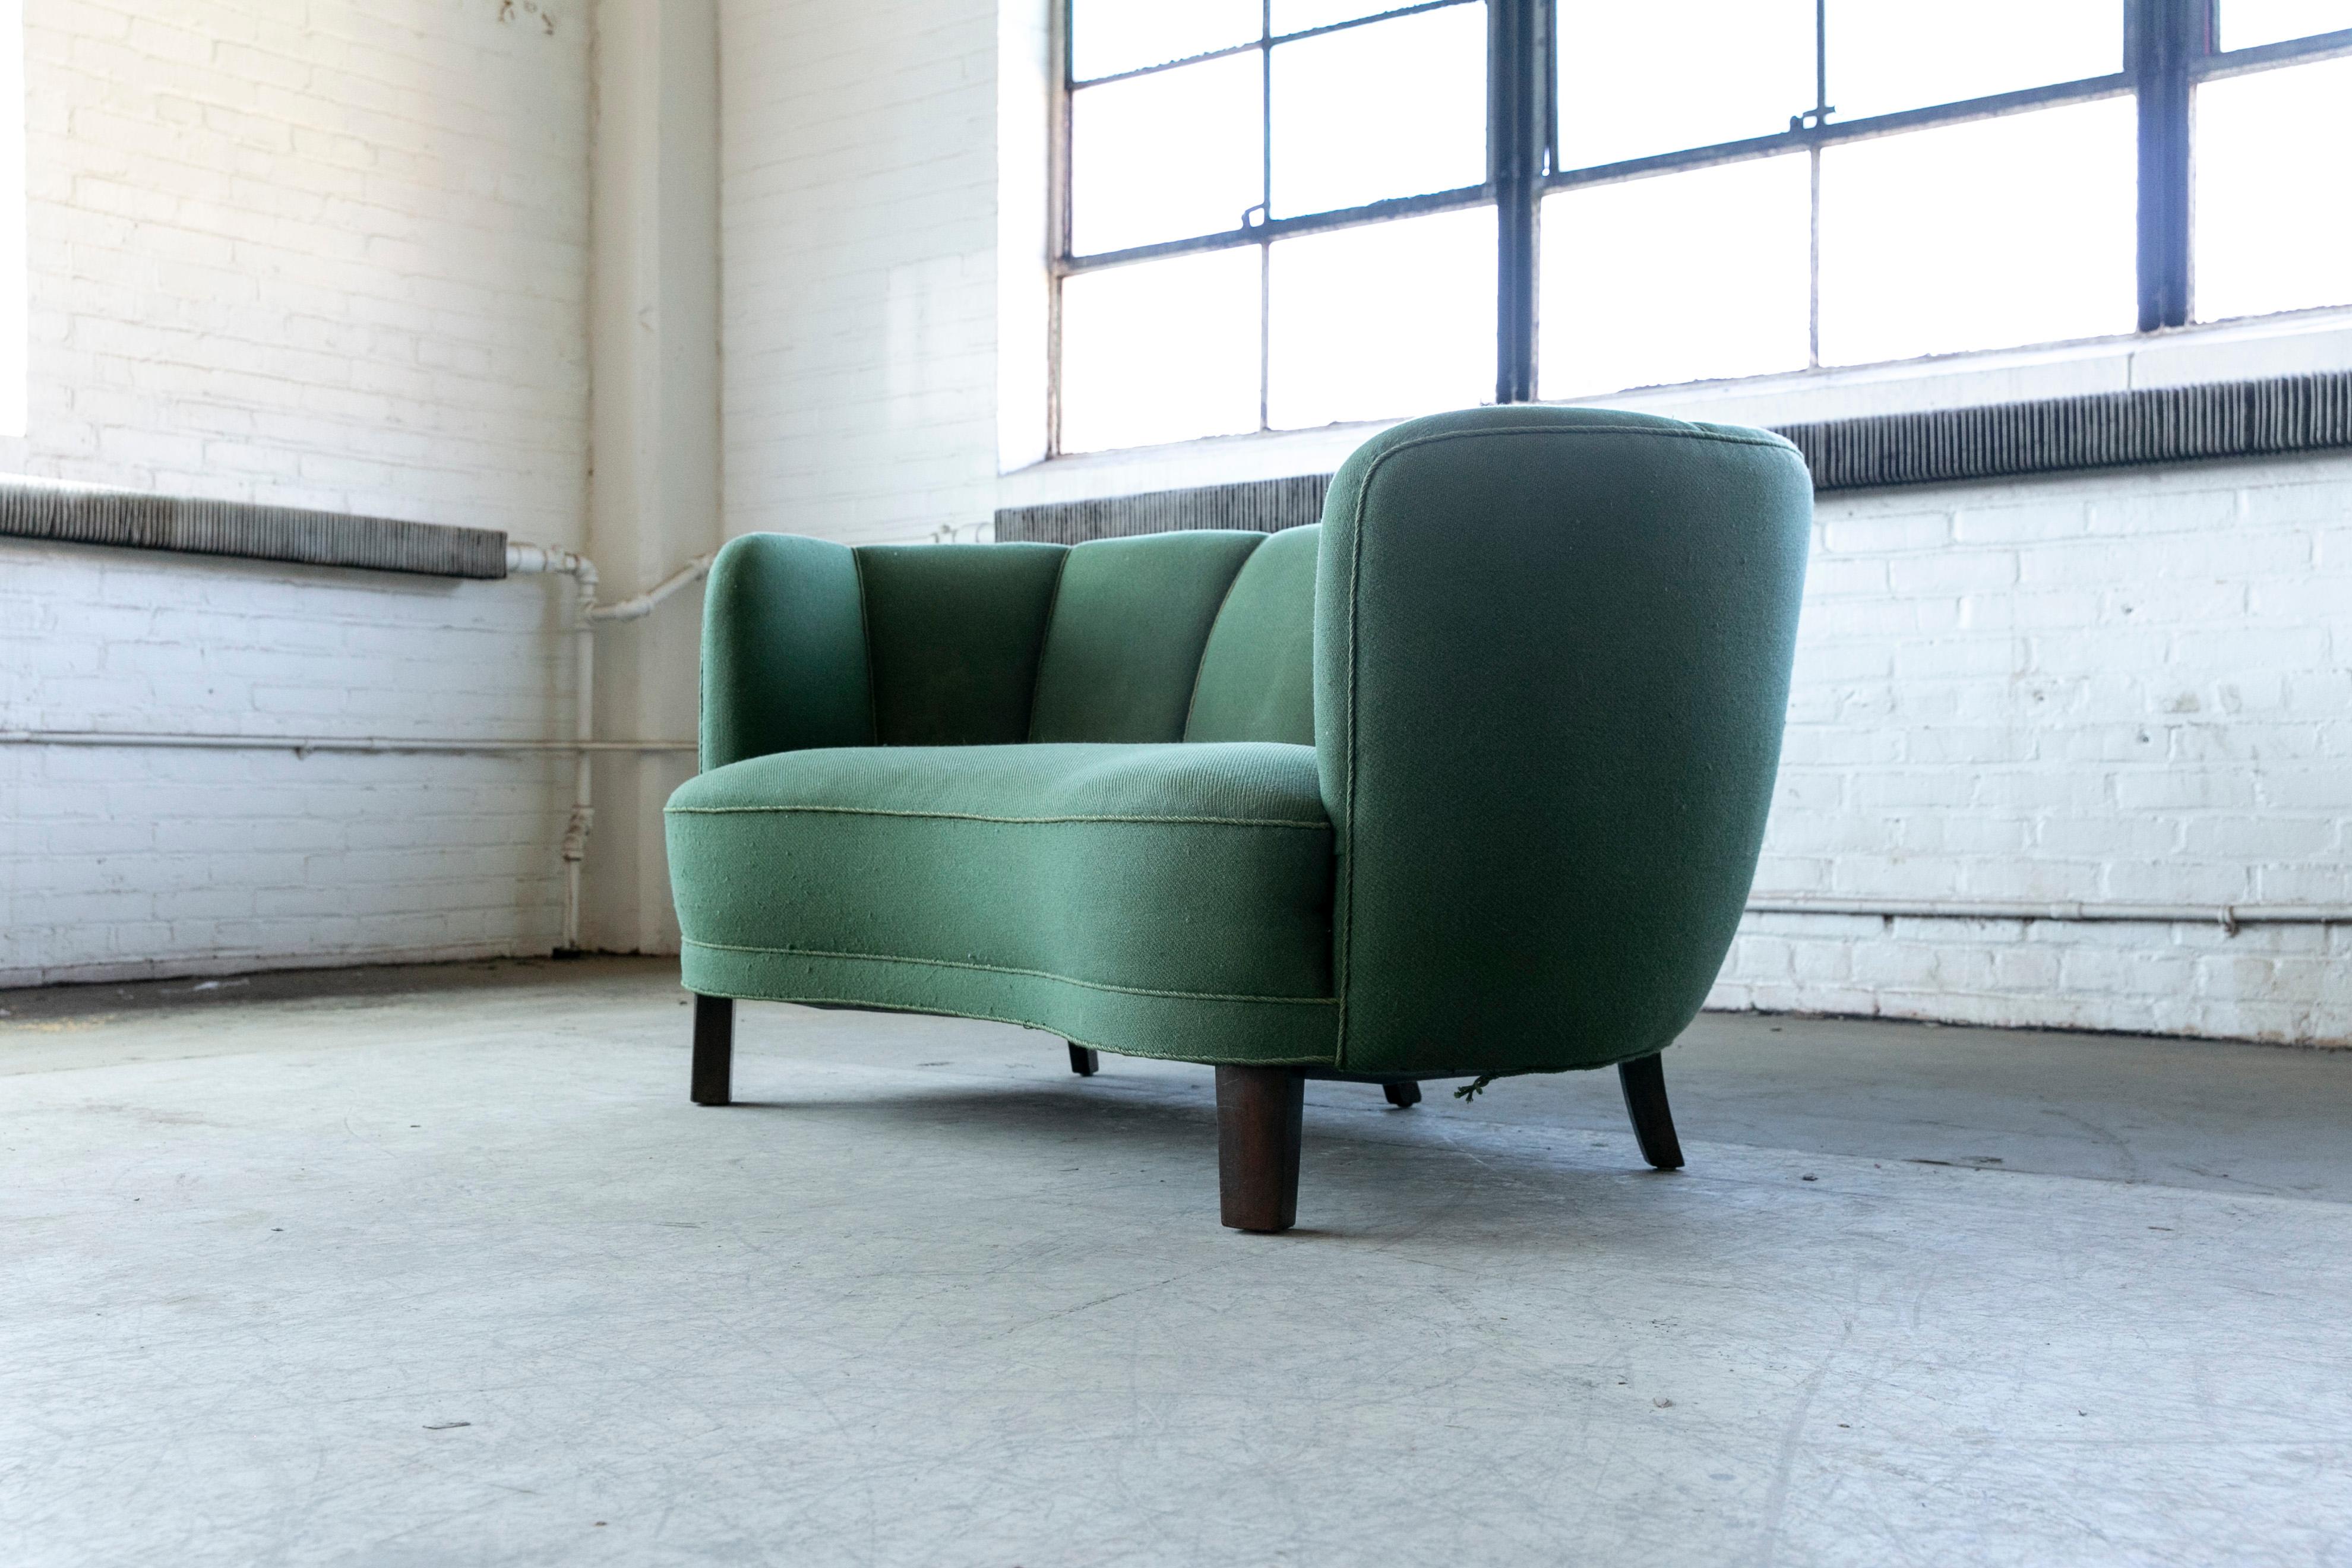 Mid-Century Modern Danish 1940s Channel Back Banana Form Curved Sofa or Loveseat in Green Wool